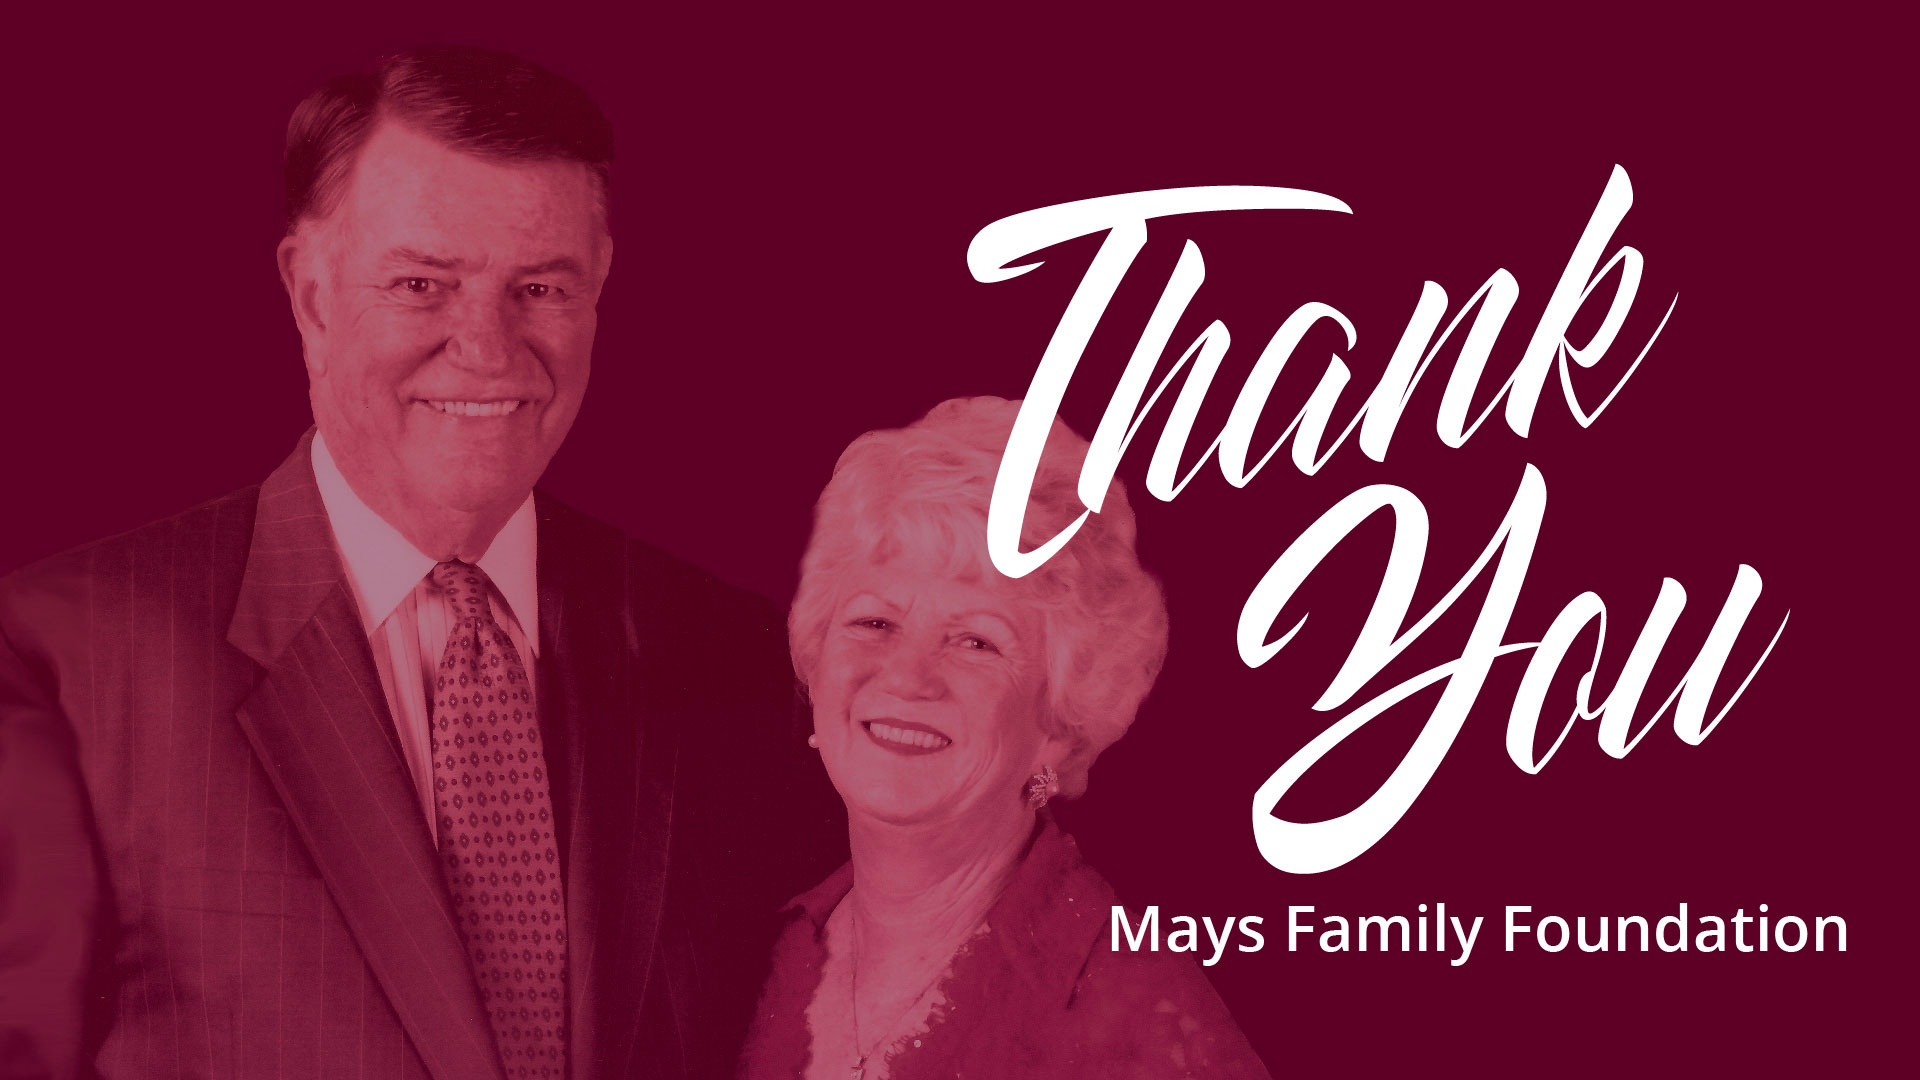 Thank you Mays Family Foundation